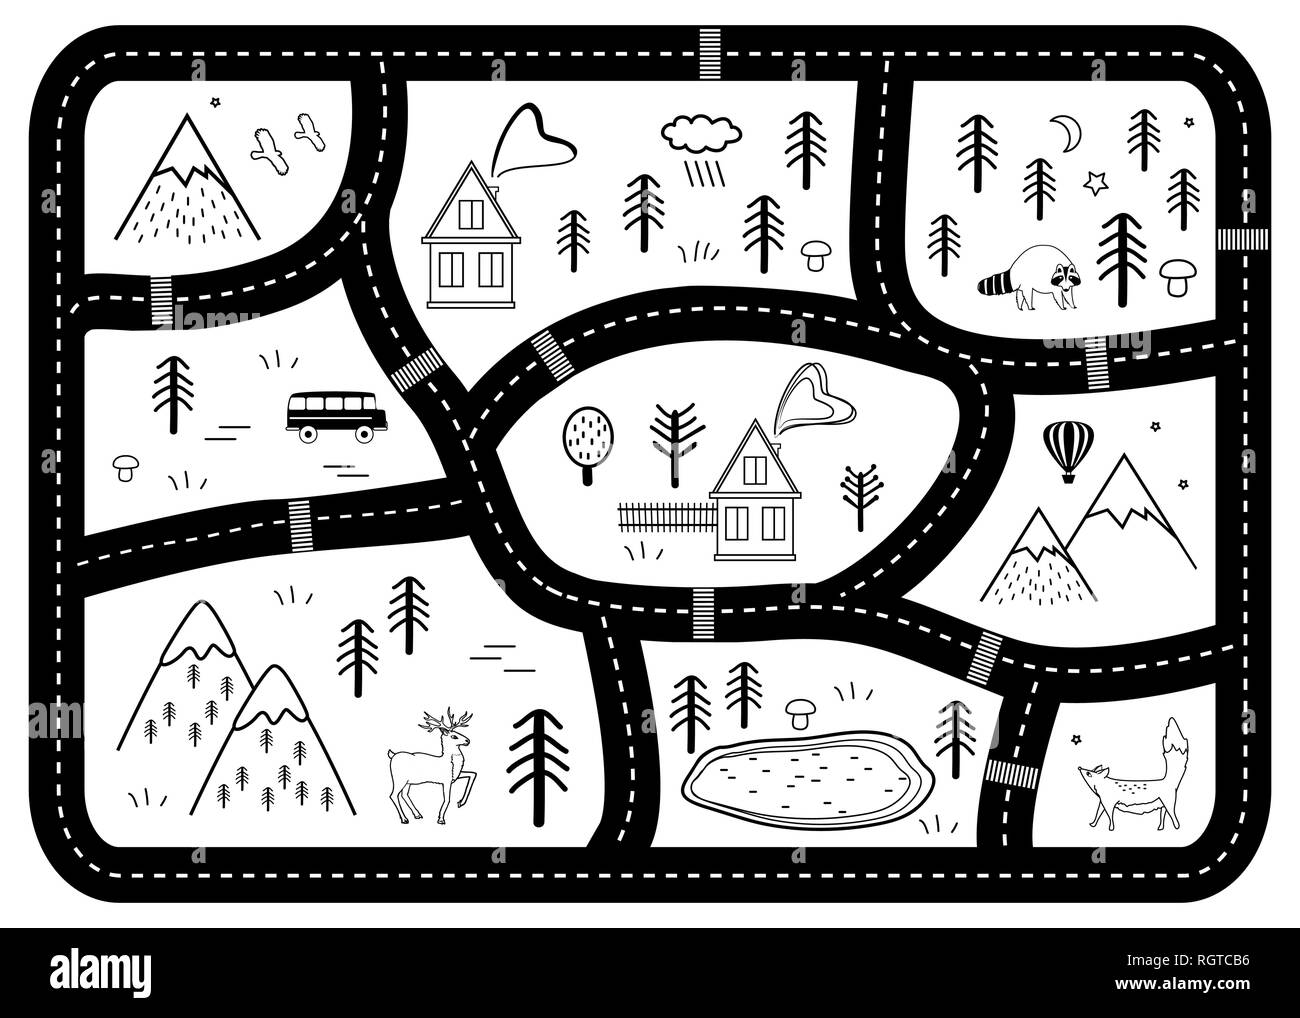 Black and White Kids Road Play Mat. Vector River, Mountains and Woods Adventure Map with Houses and Animals. Scandinavian Style Art. Stock Vector